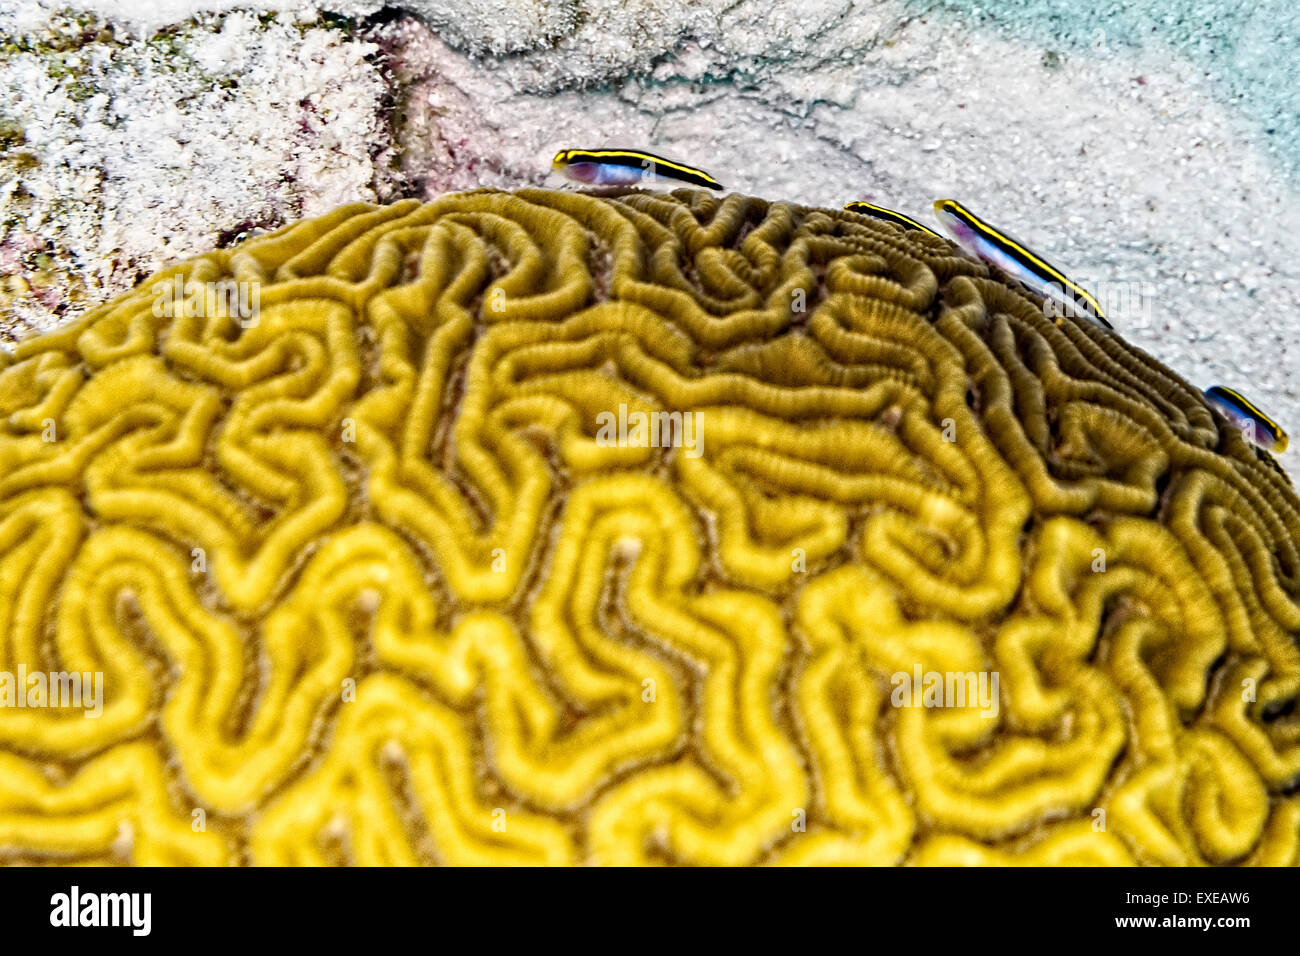 Colin's Cleaning Gobies on a Grooved Brain Coral at Sharon's Serenity in Klein Bonaire, Bonaire Stock Photo